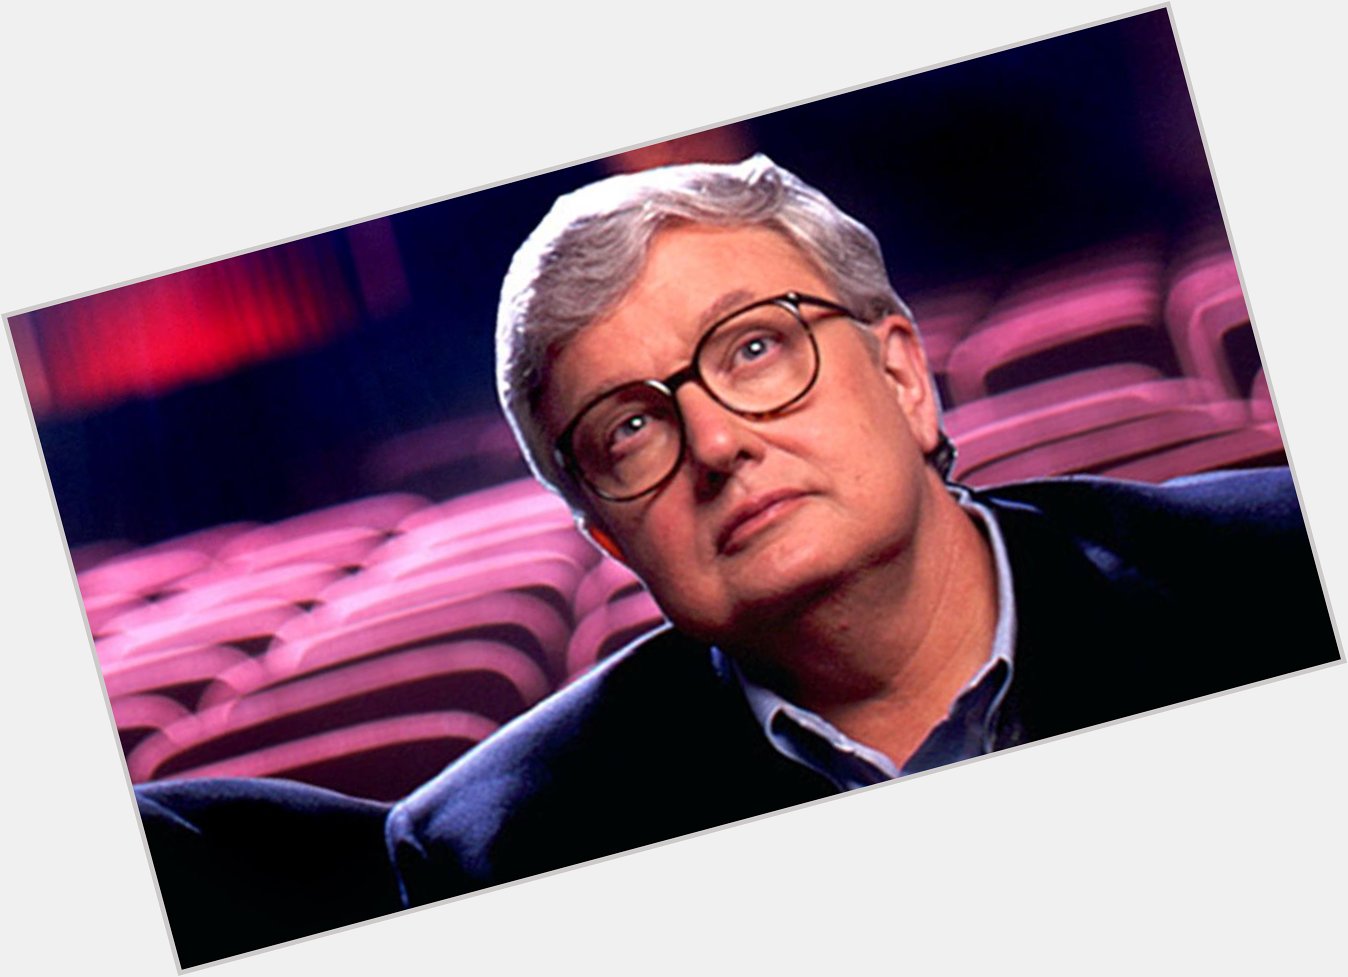 In Memoriam of the late and great Roger Ebert. Happy Birthday and RIP. 